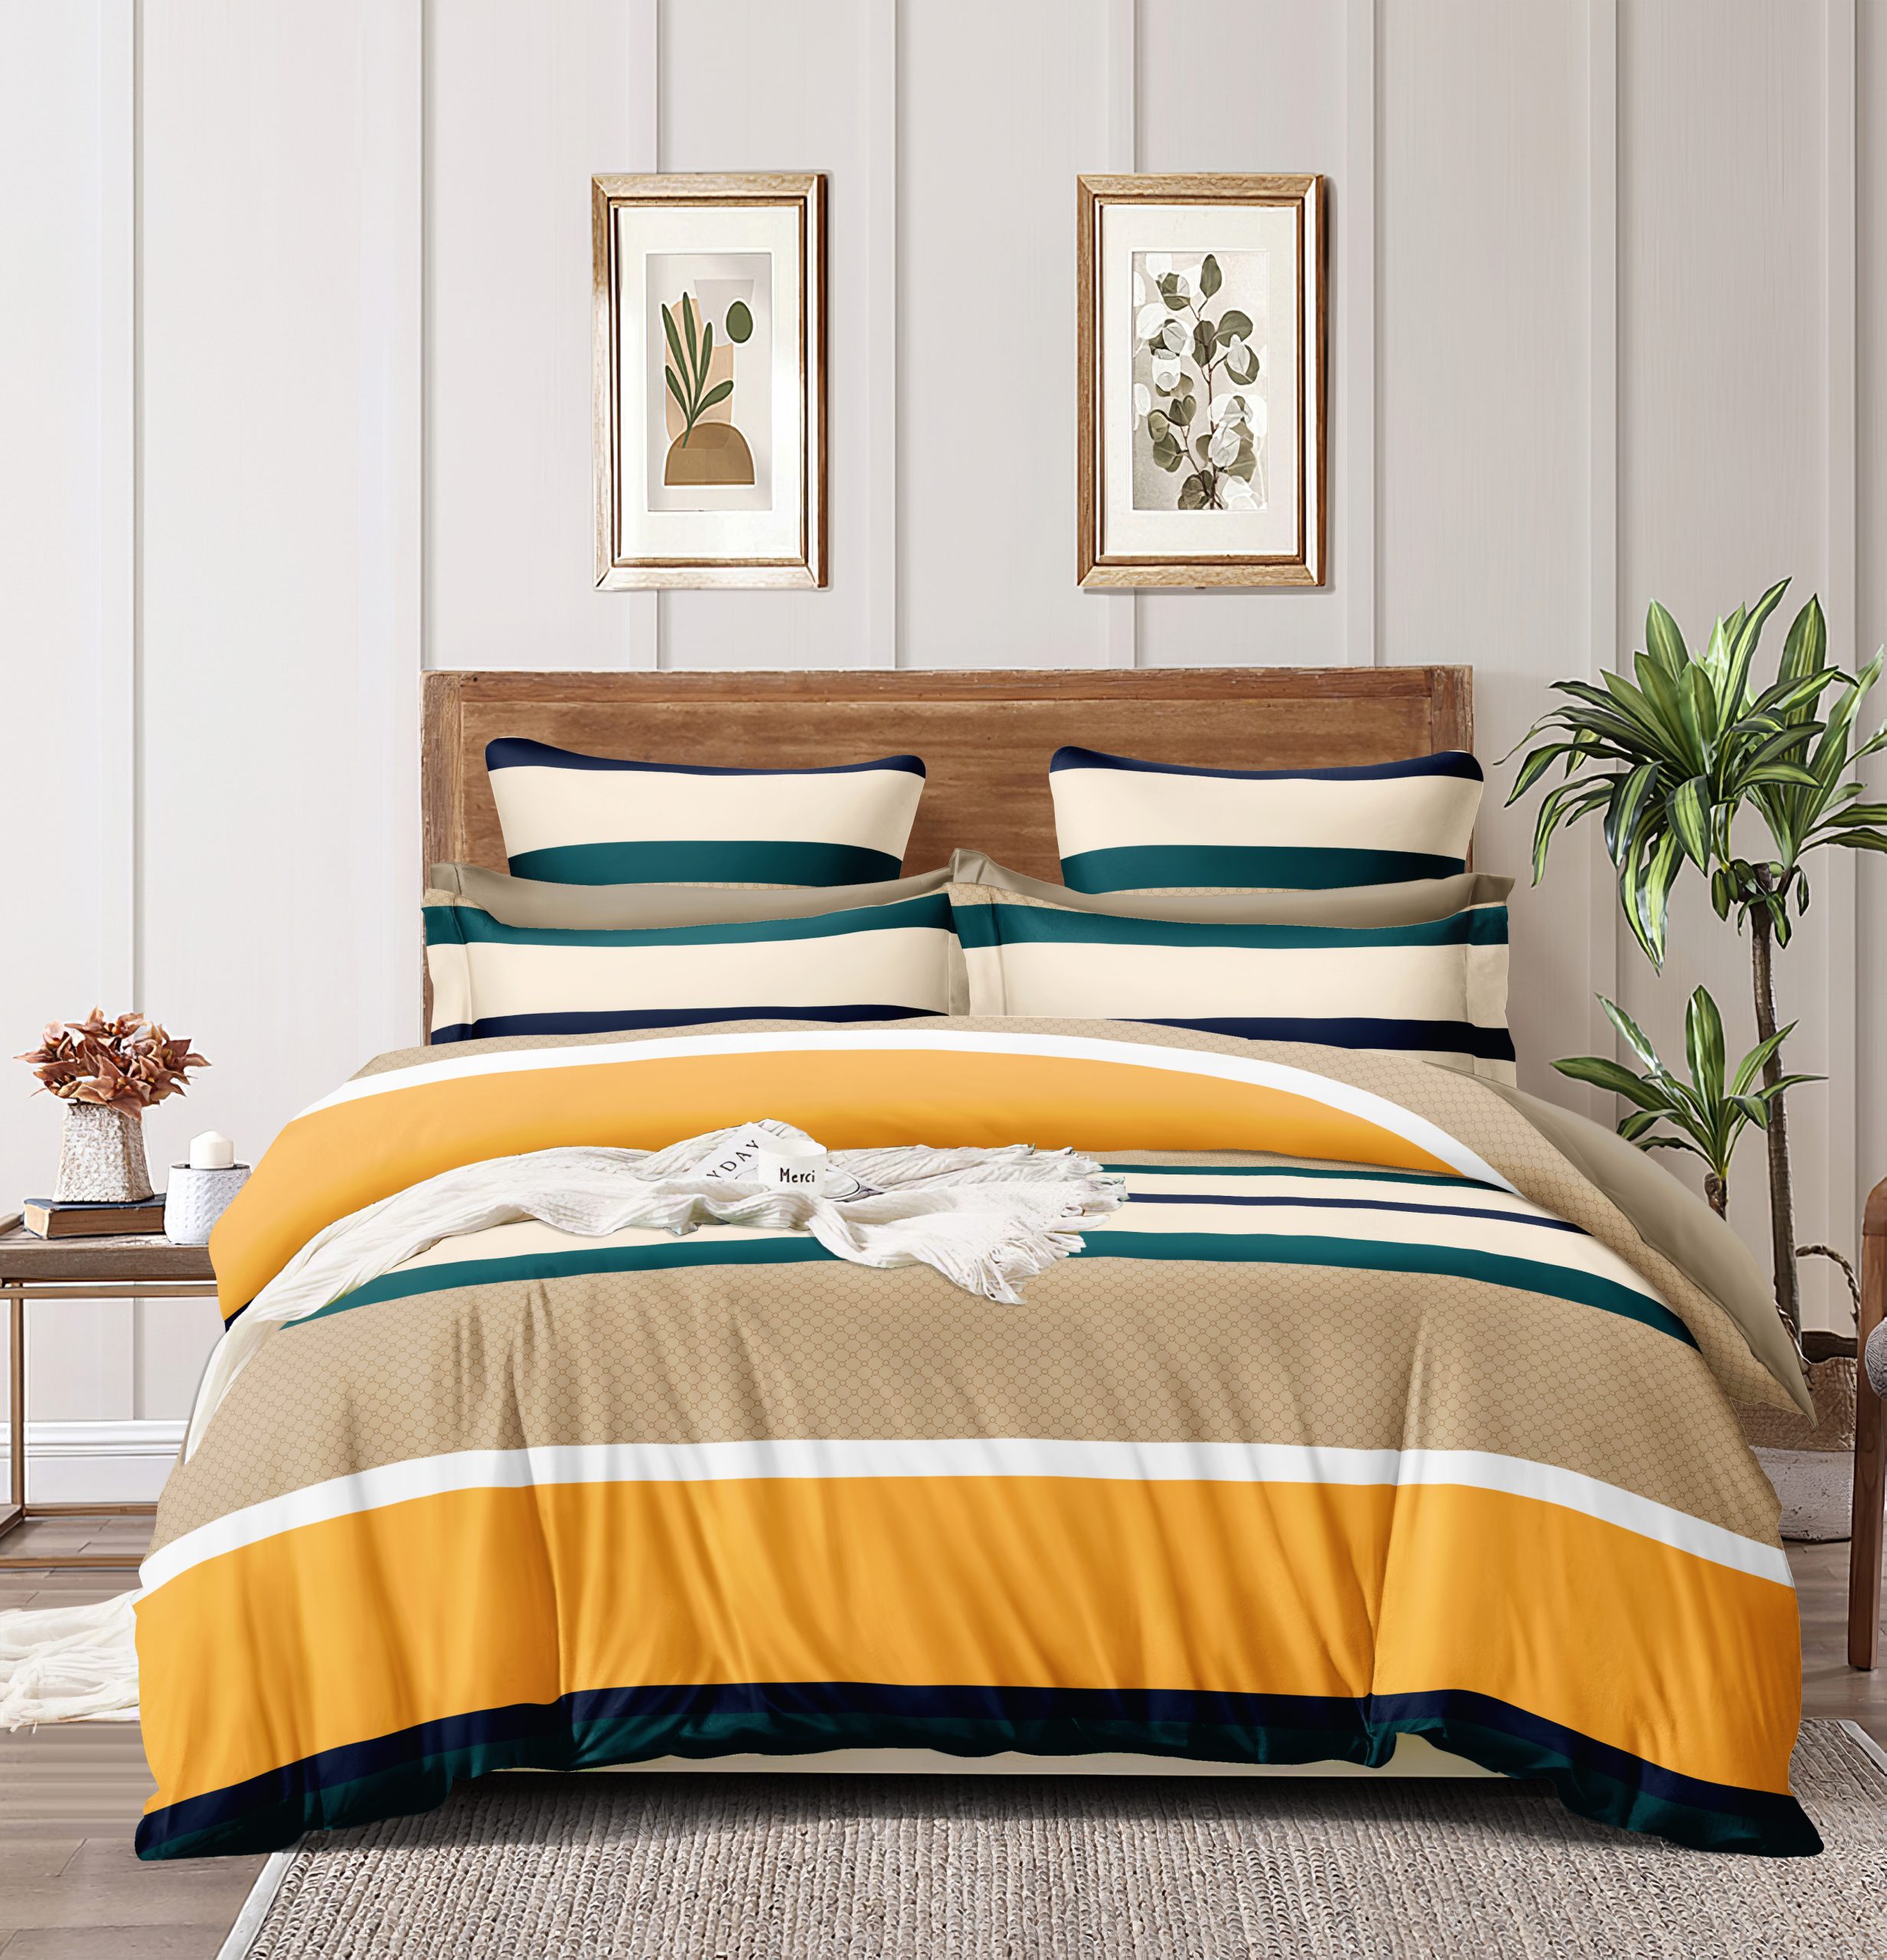 Homewards Striped Double Bed Comforter in Yellow and Turquoise